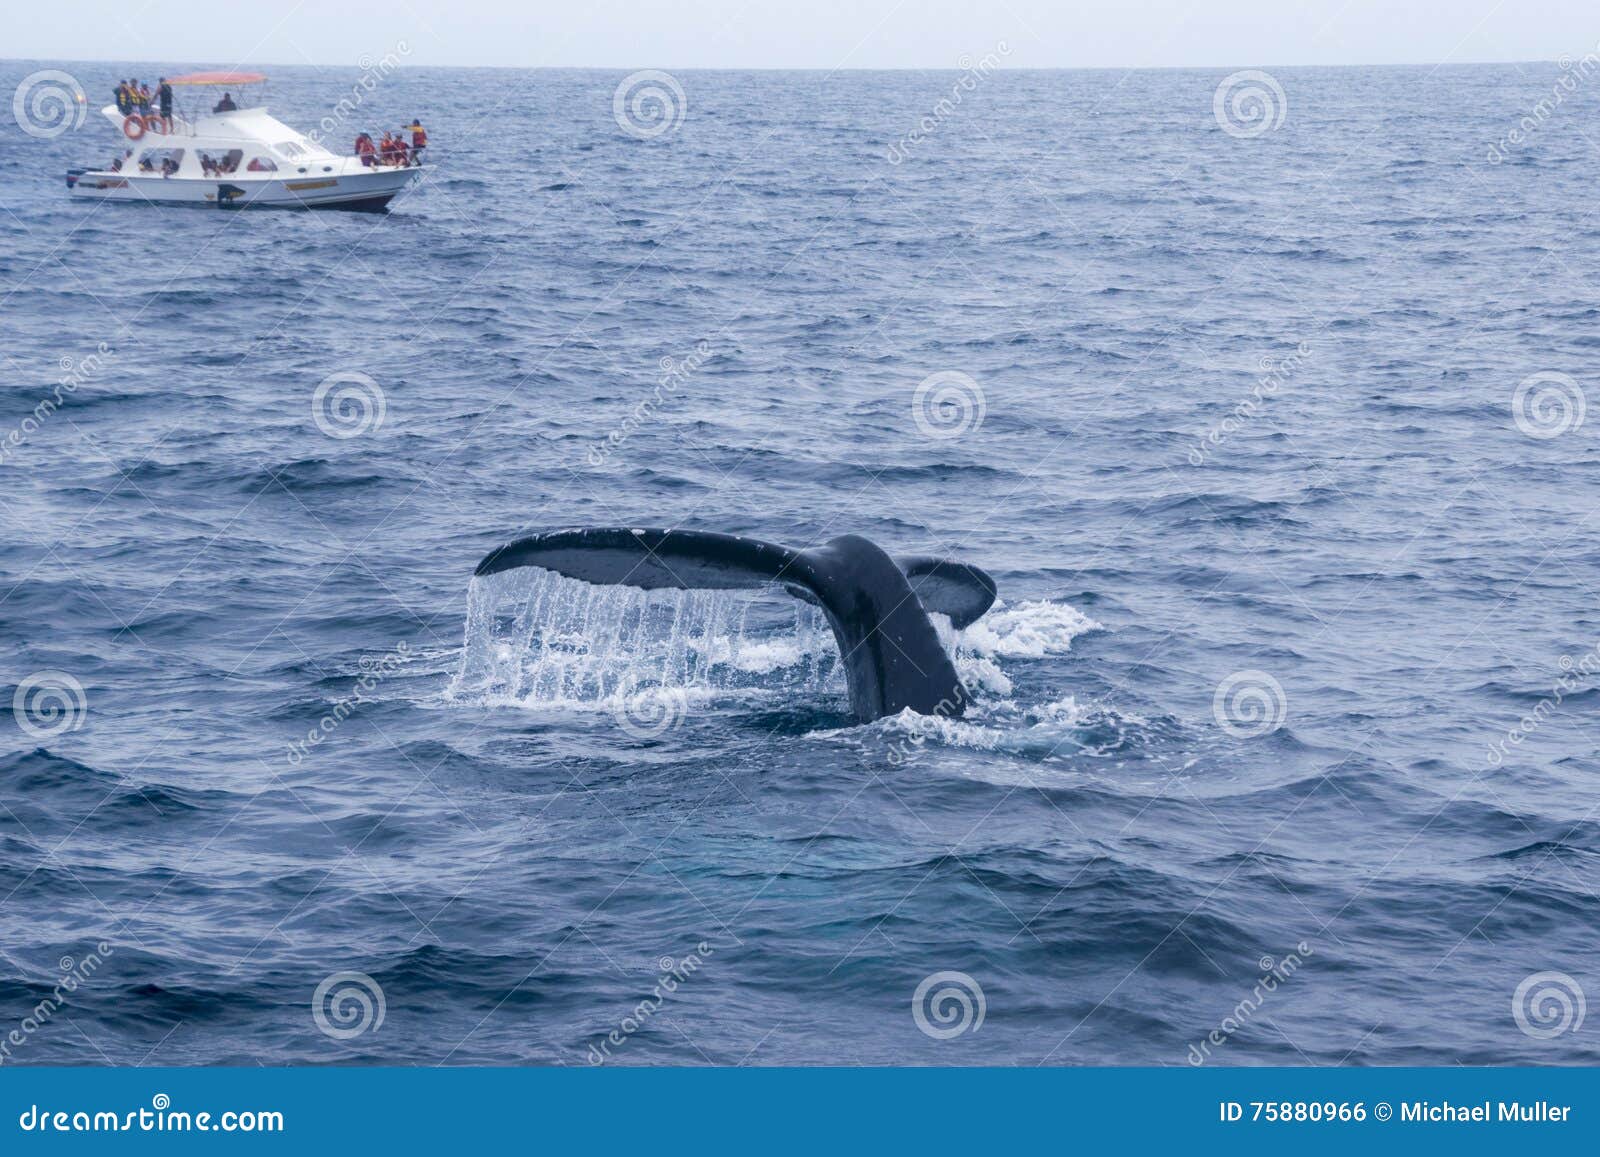 humpback whale watching in the coast of ecuador